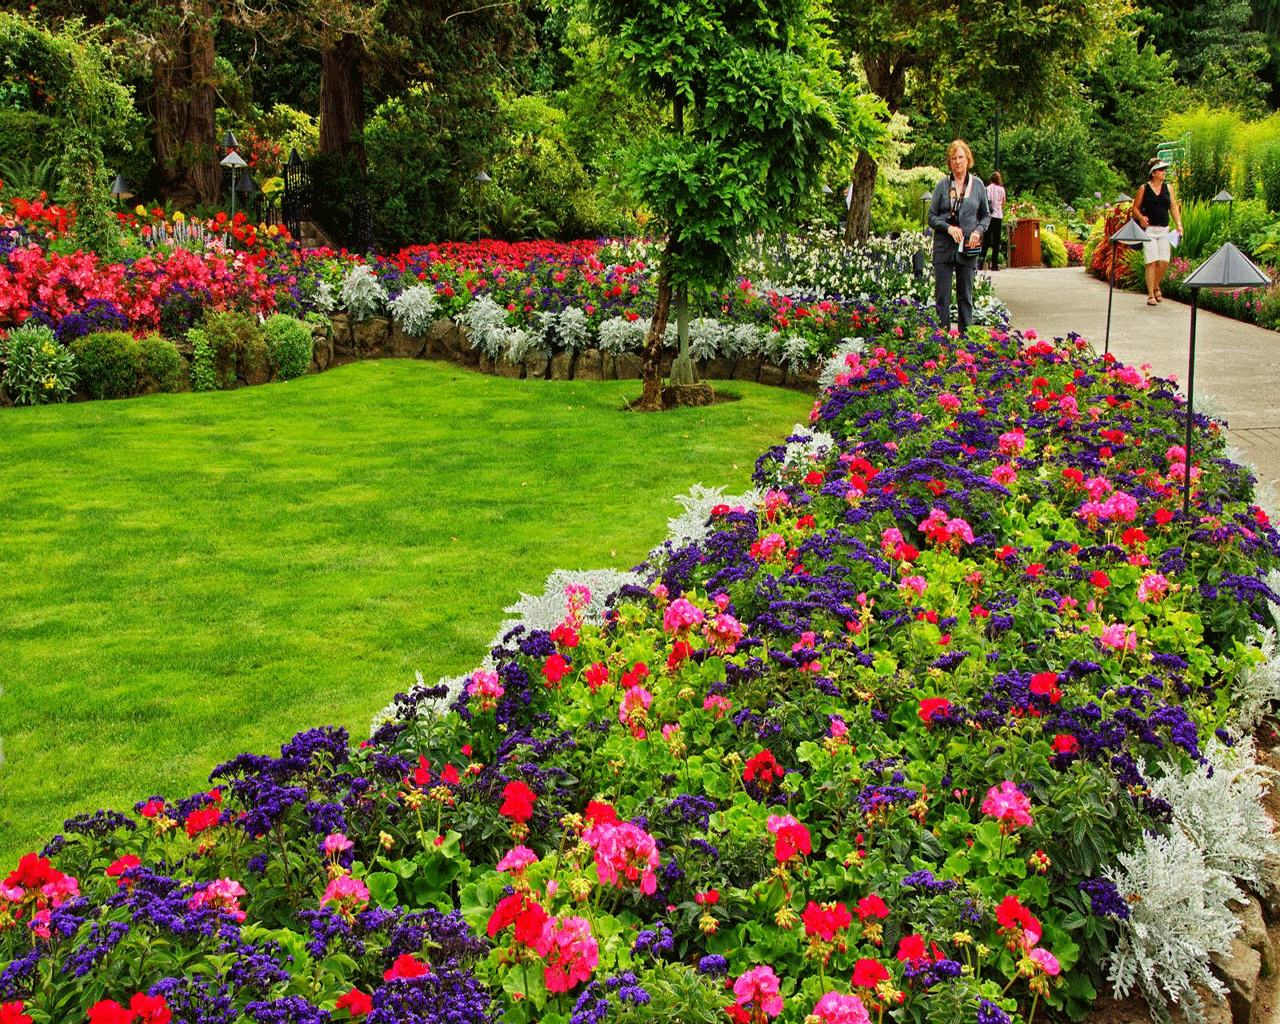 Planning Your Flower Beds for this Upcoming Season